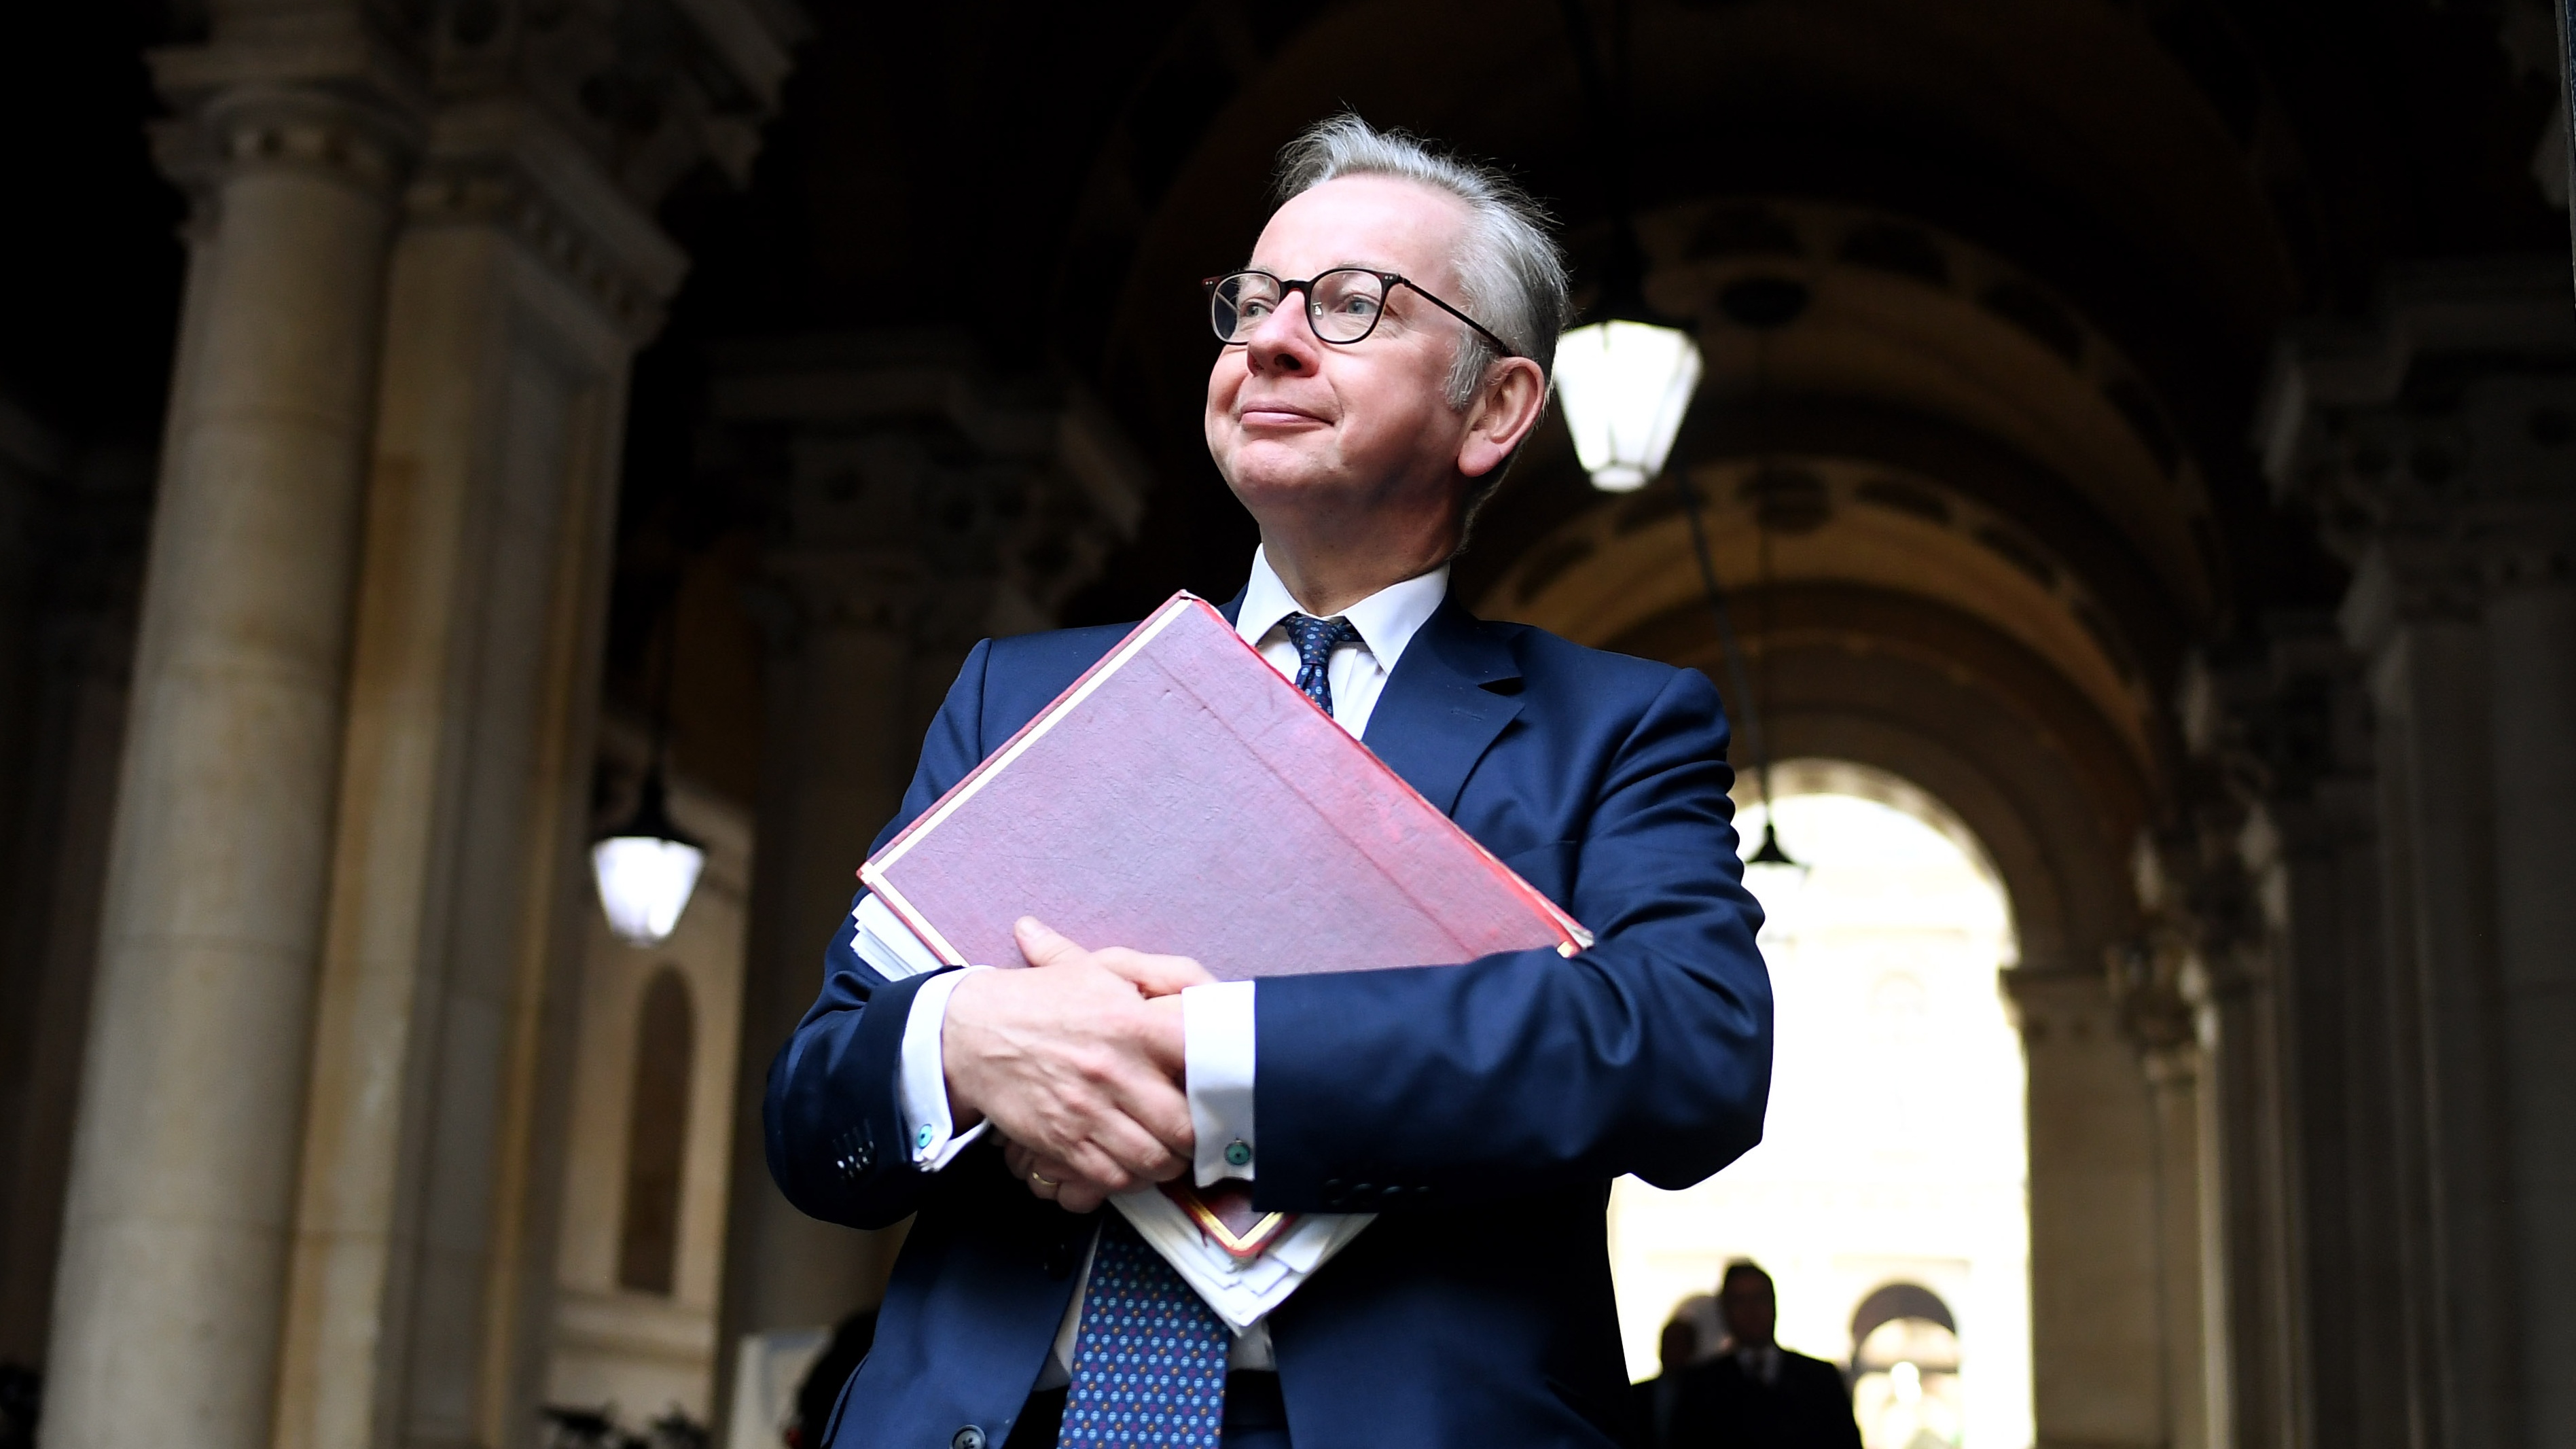 Michael Gove walks to Downing Street after attending a cabinet meeting